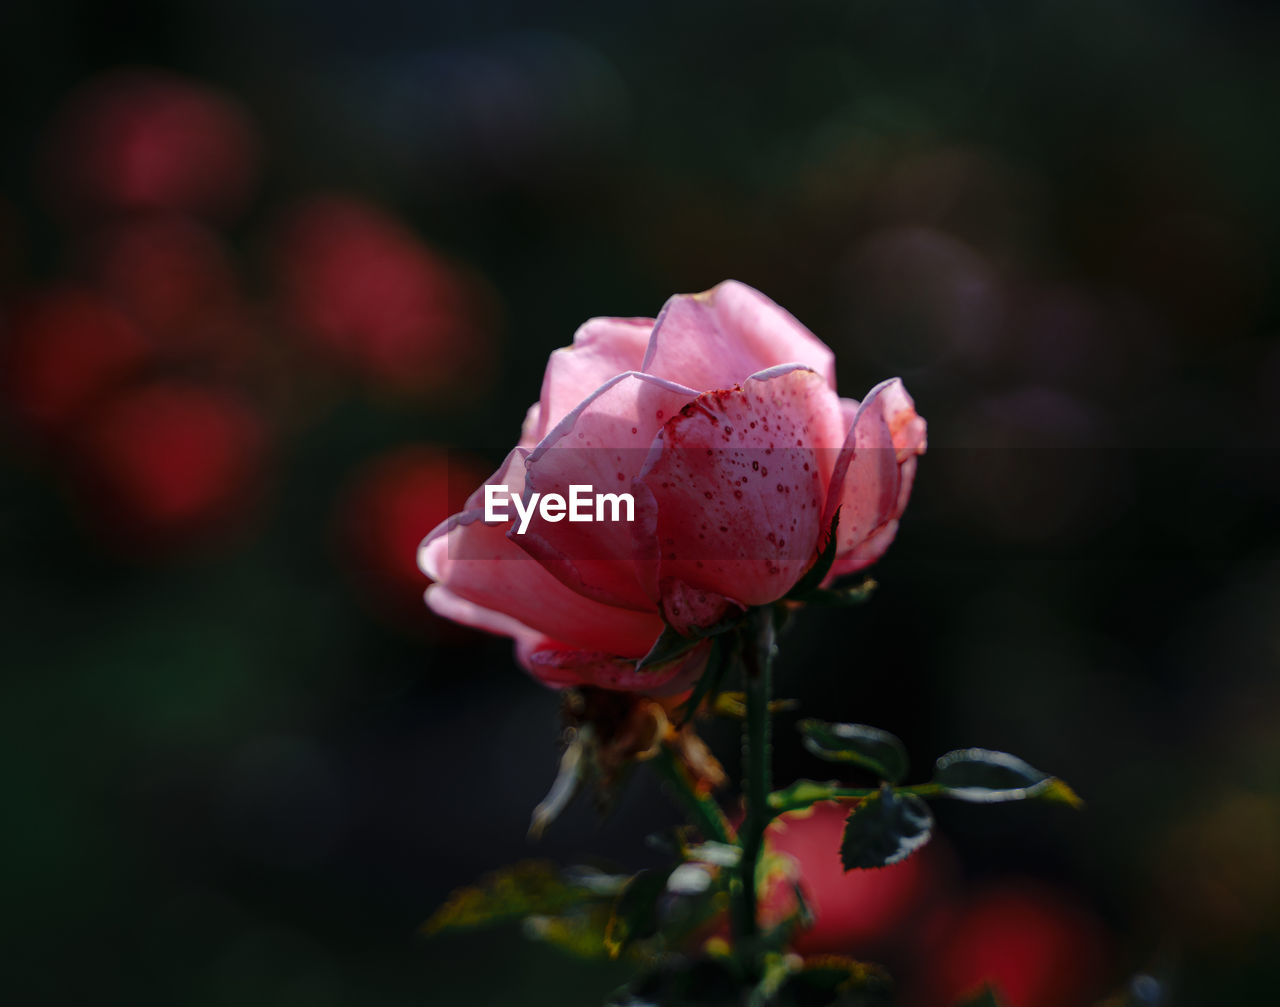 flower, plant, flowering plant, beauty in nature, red, rose, freshness, macro photography, close-up, petal, nature, pink, garden roses, blossom, flower head, fragility, inflorescence, focus on foreground, no people, bud, growth, leaf, outdoors, plant part, rose - flower, multi colored, yellow, springtime